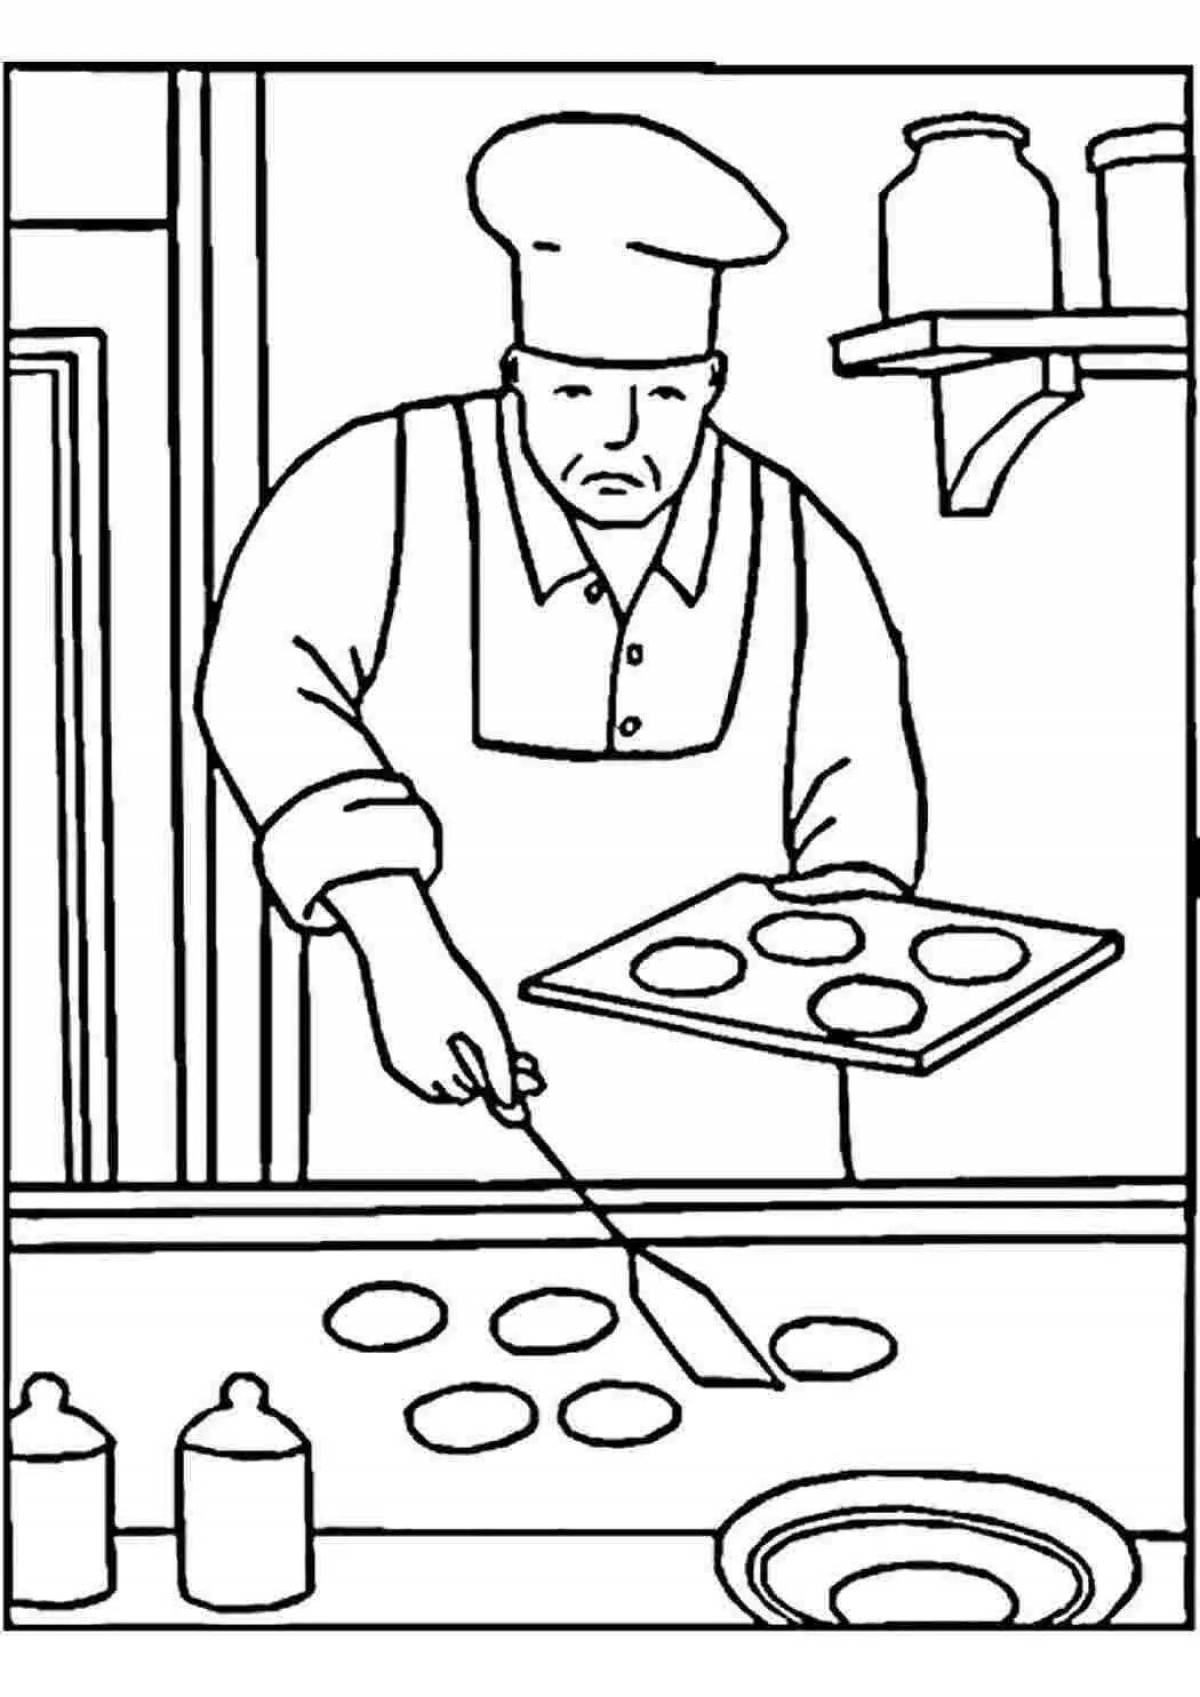 Coloring page of a sociable chef